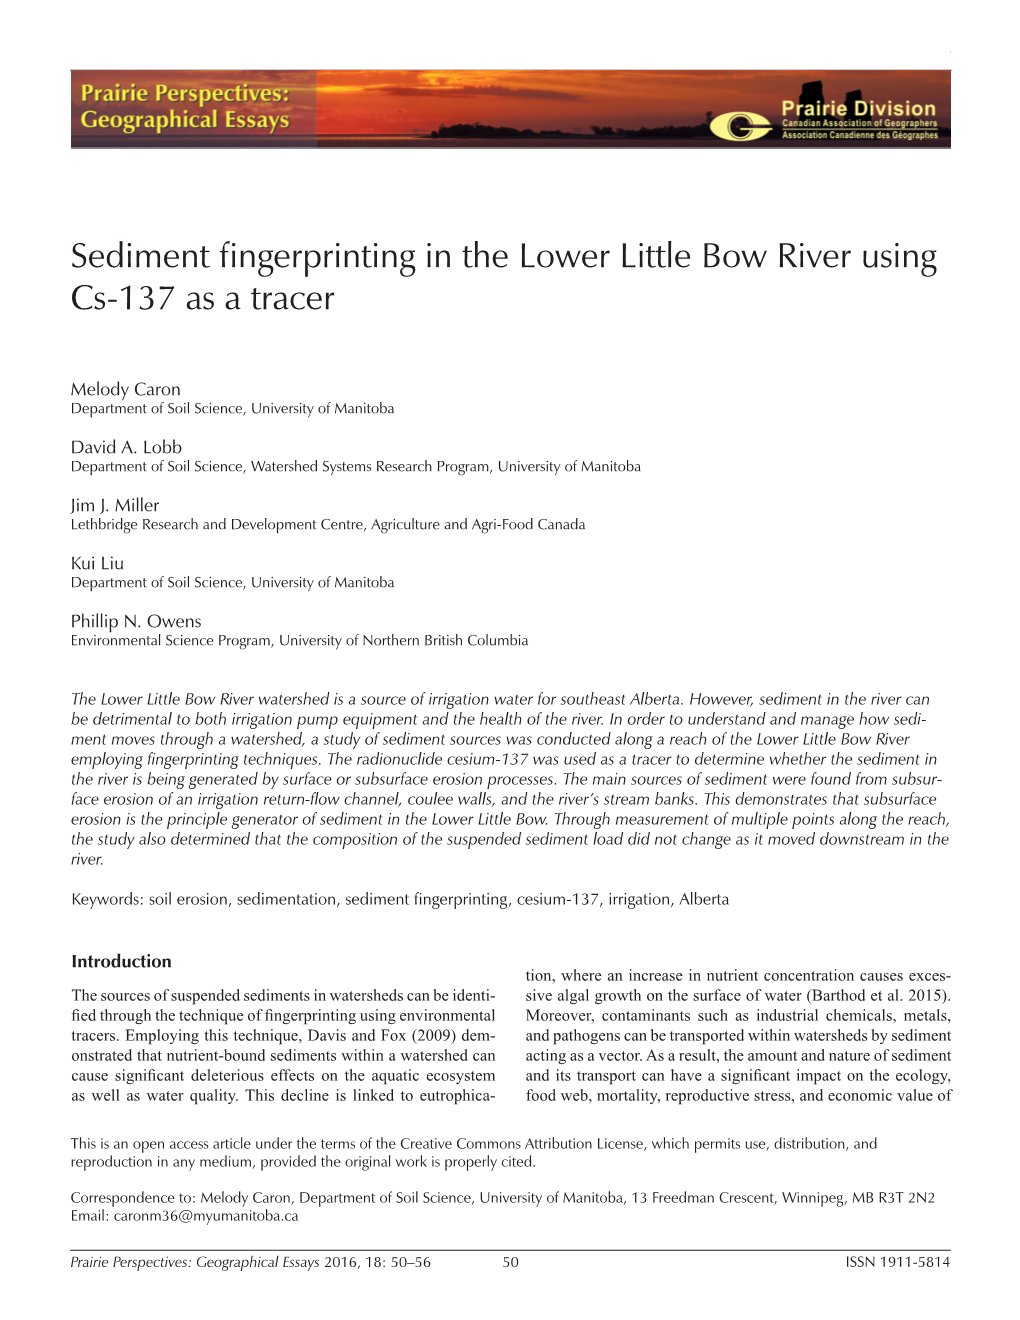 Sediment Fingerprinting in the Lower Little Bow River Using Cs-137 As a Tracer